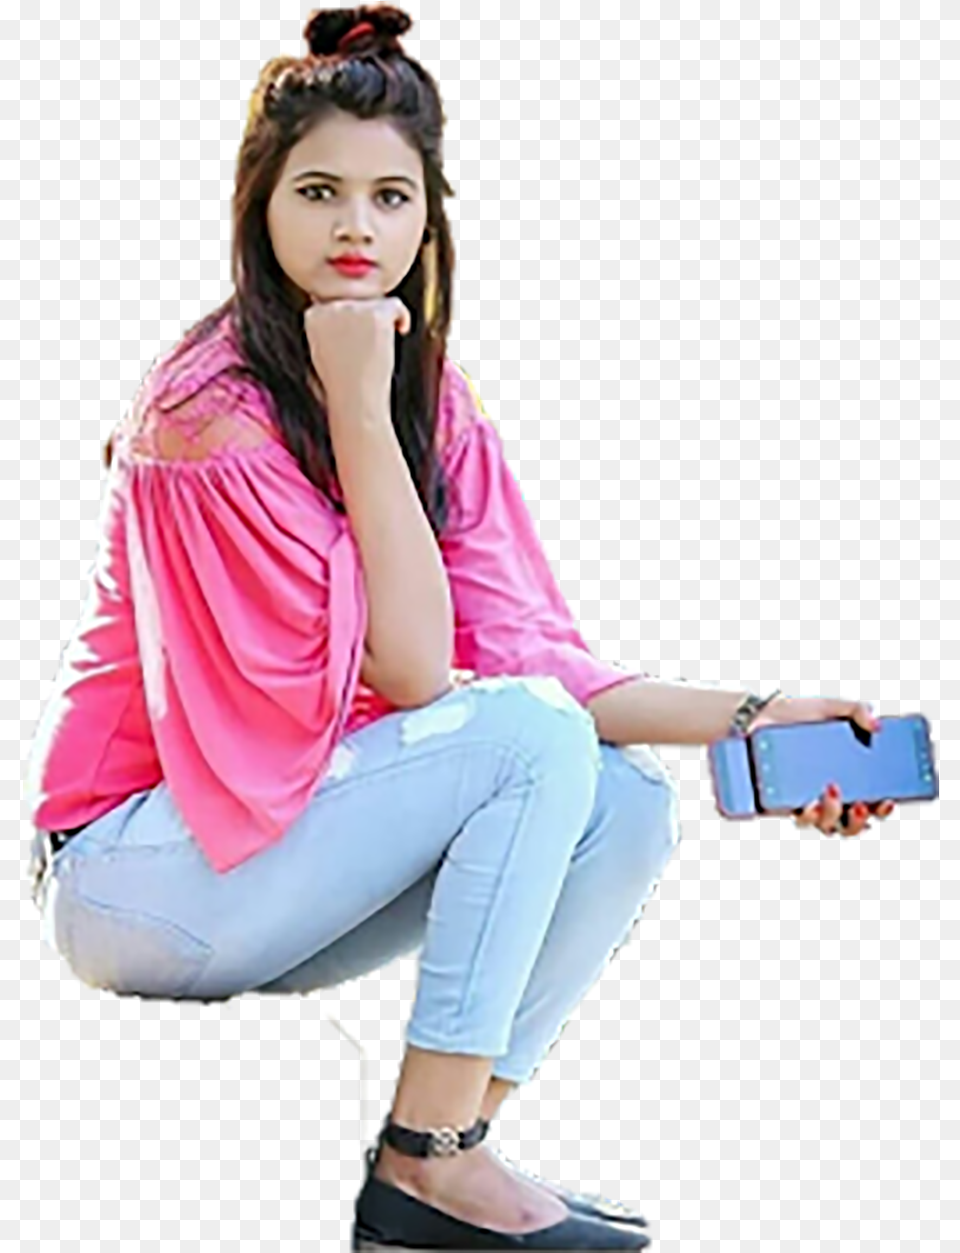 New Royal Editing Hot Girl For Picsart, Photography, Person, Sitting, Head Png